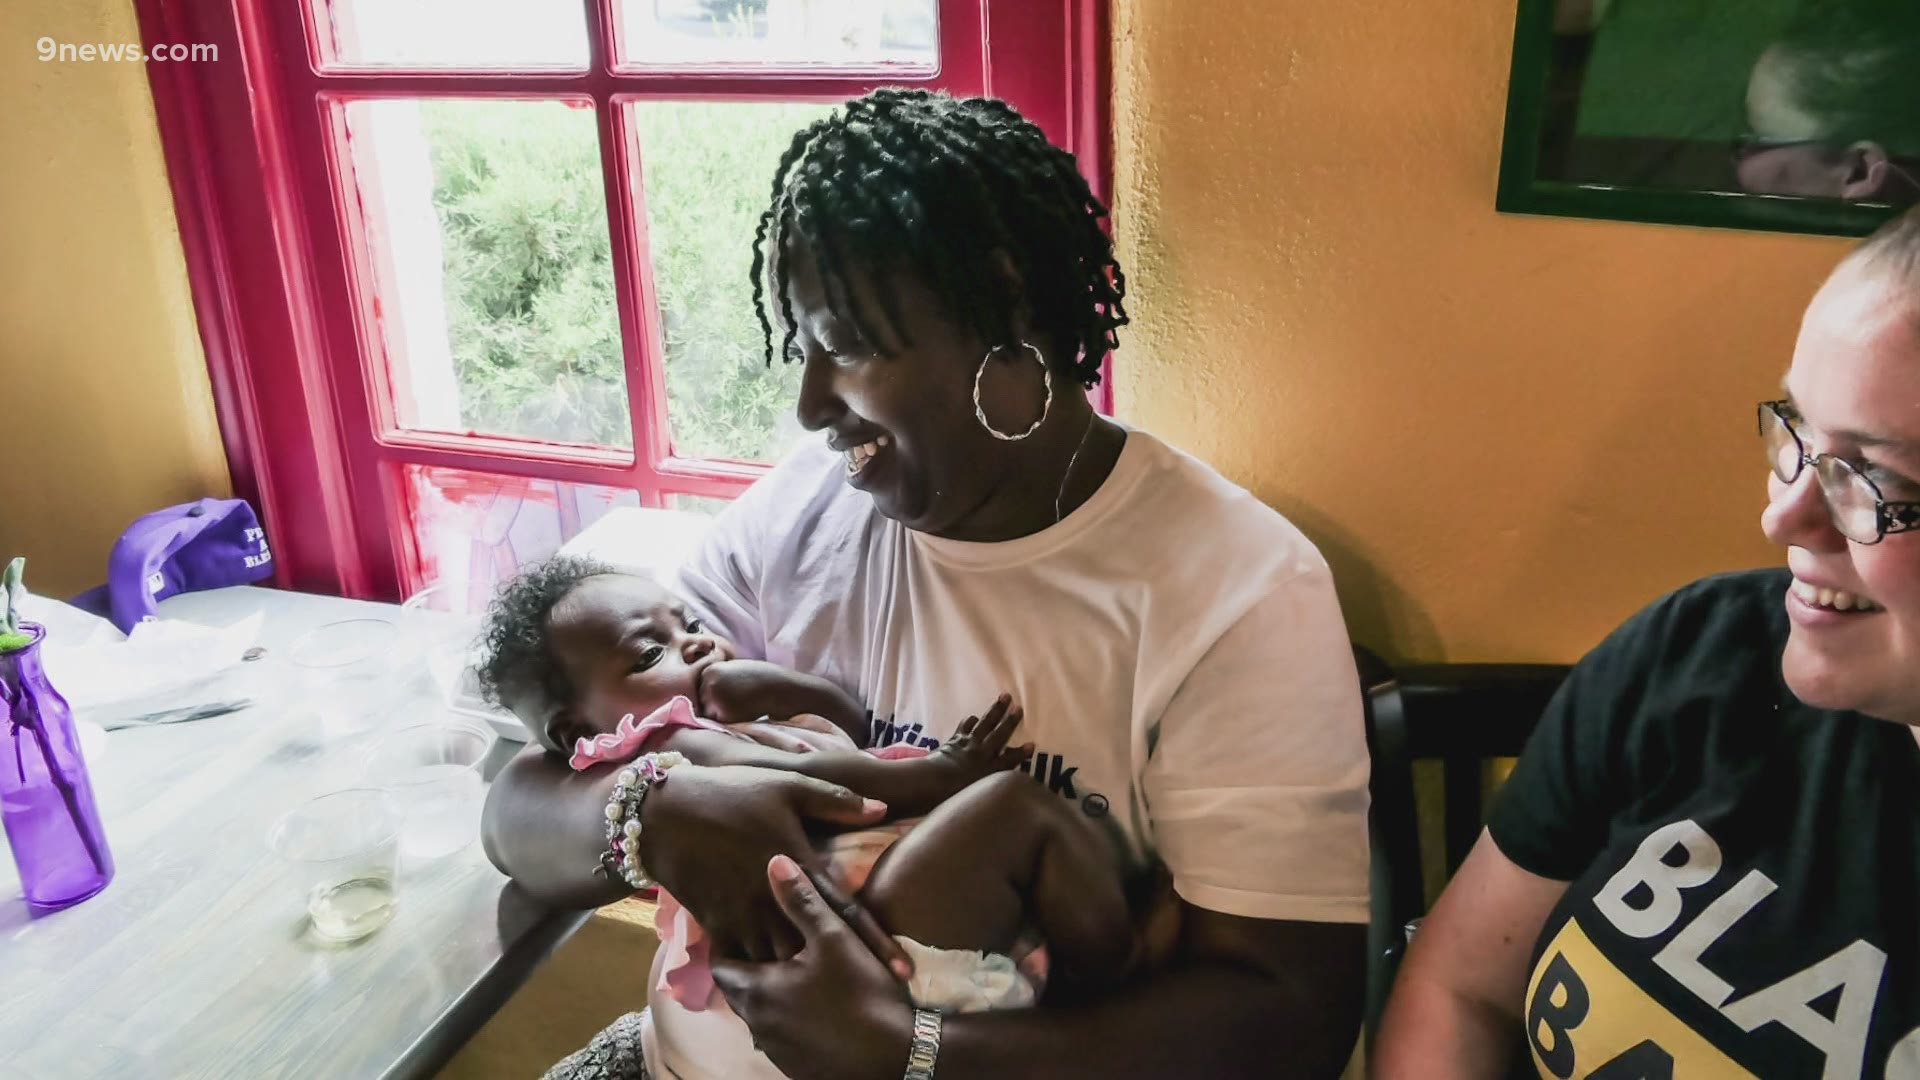 Midwives have played a critical role in improving care and outcomes for Black families.